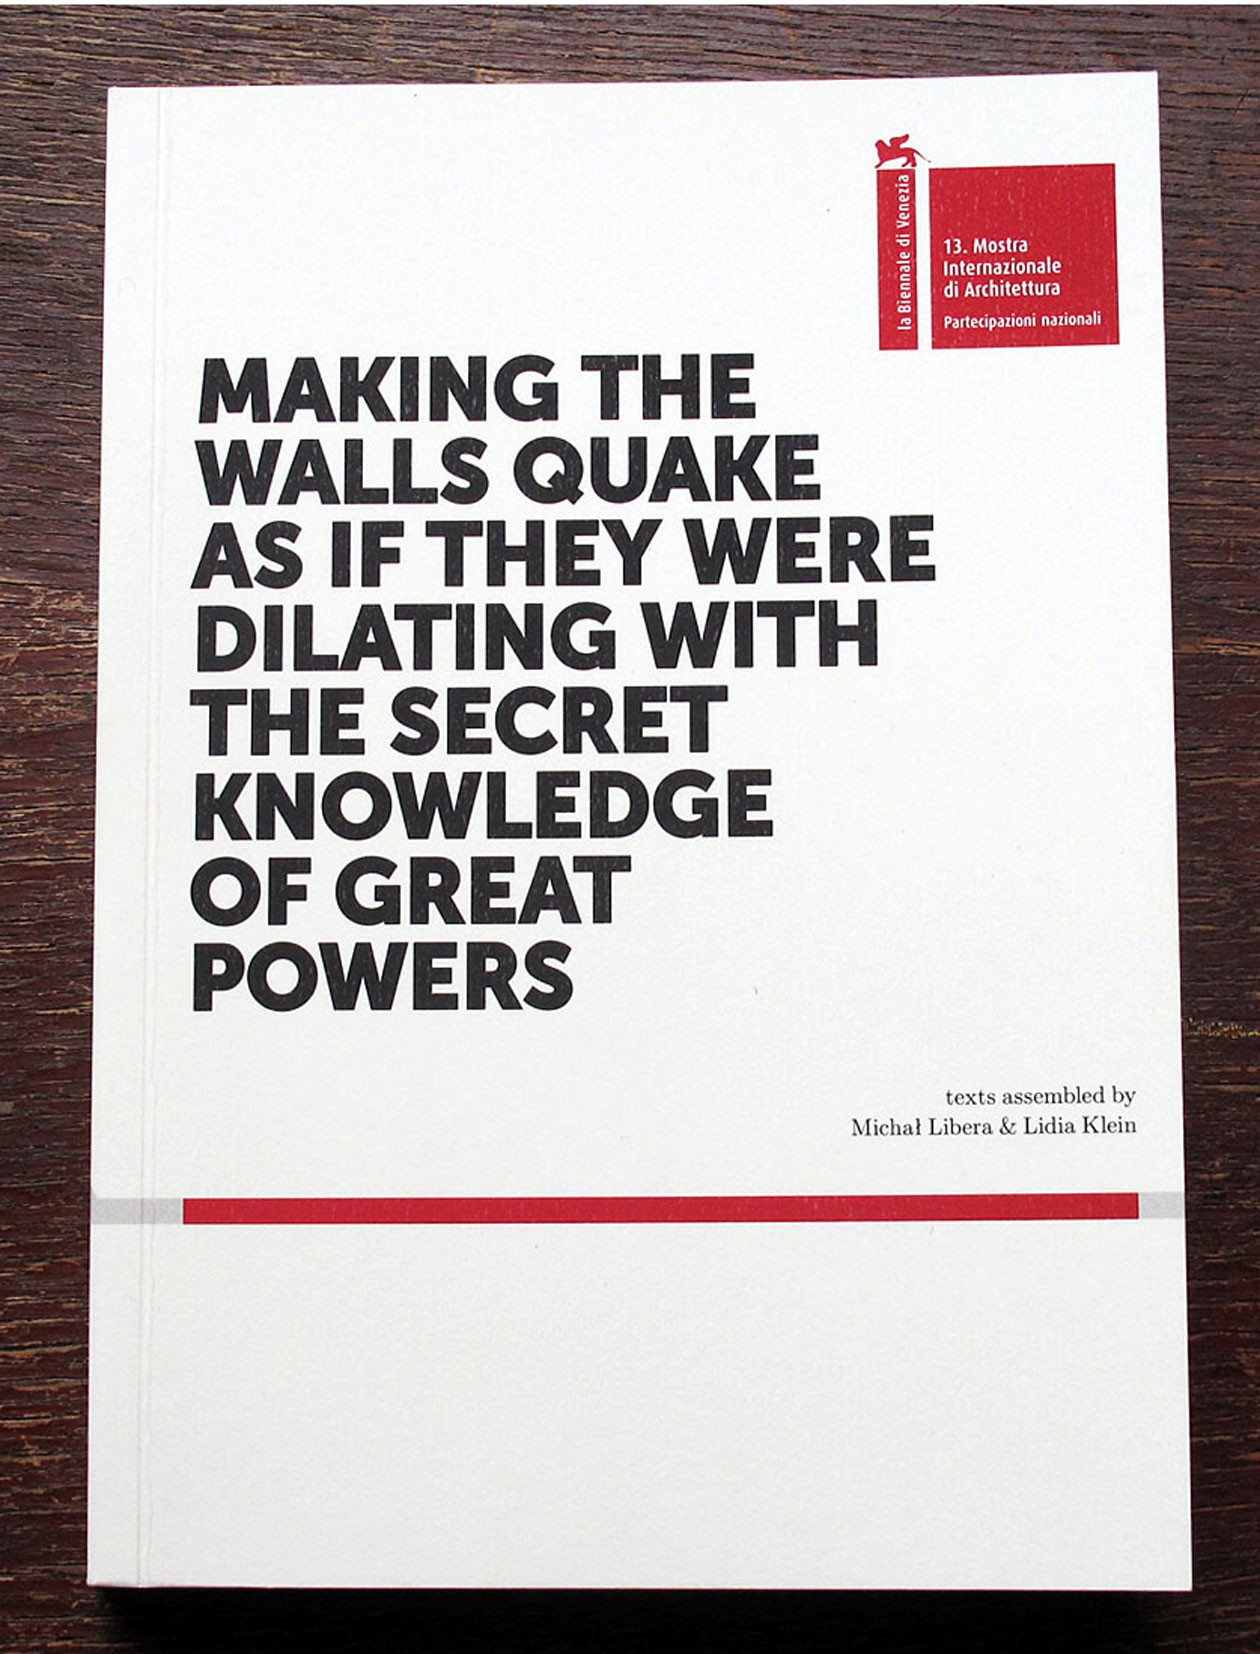 Making the walls quake as if they were dilating with the secret